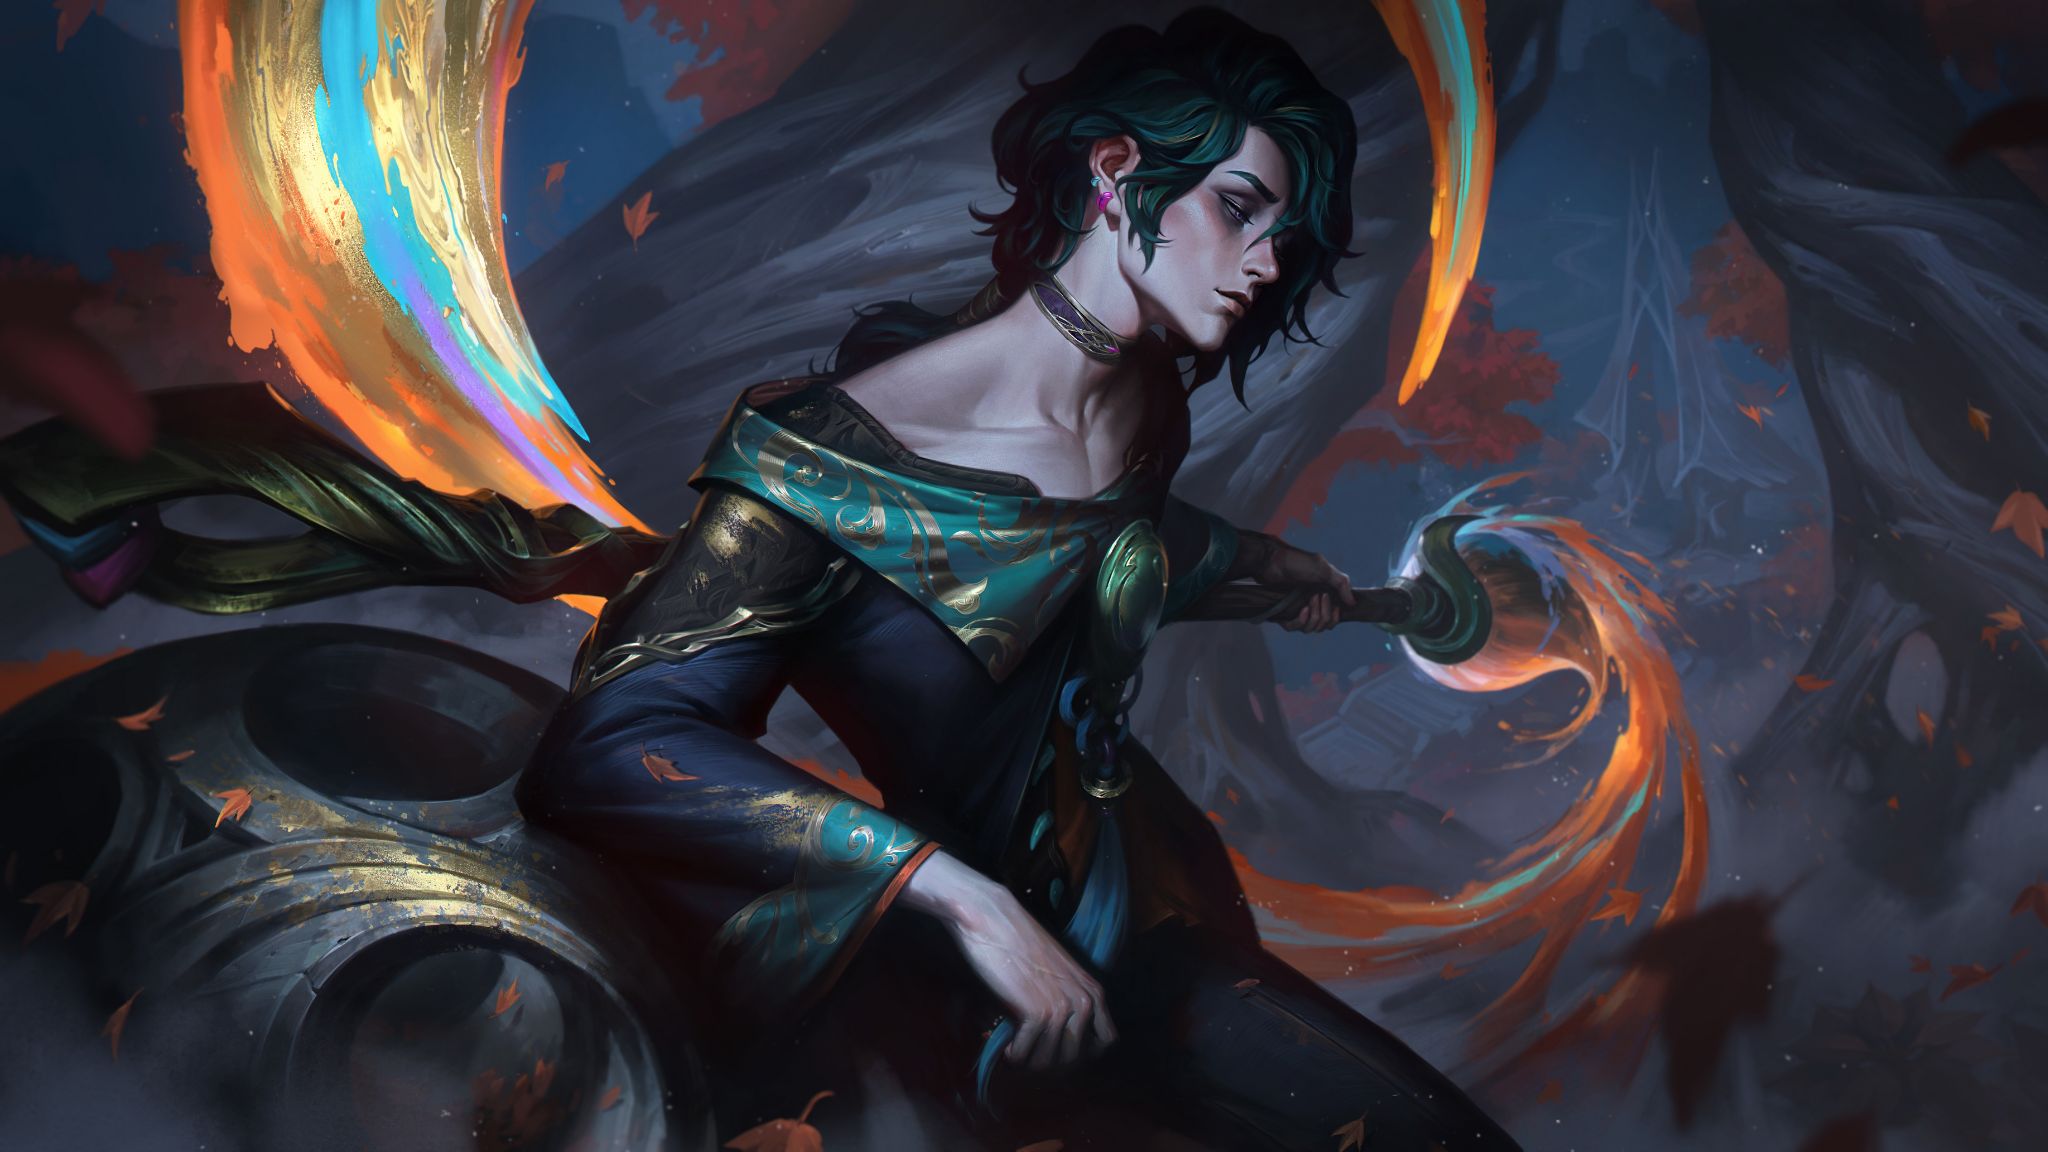 Splash art for Hwei, the Visionary, a young man with a brooding appearance and dark hair. Colorful paint from his magical paintbrush swirls dramatically behind him.